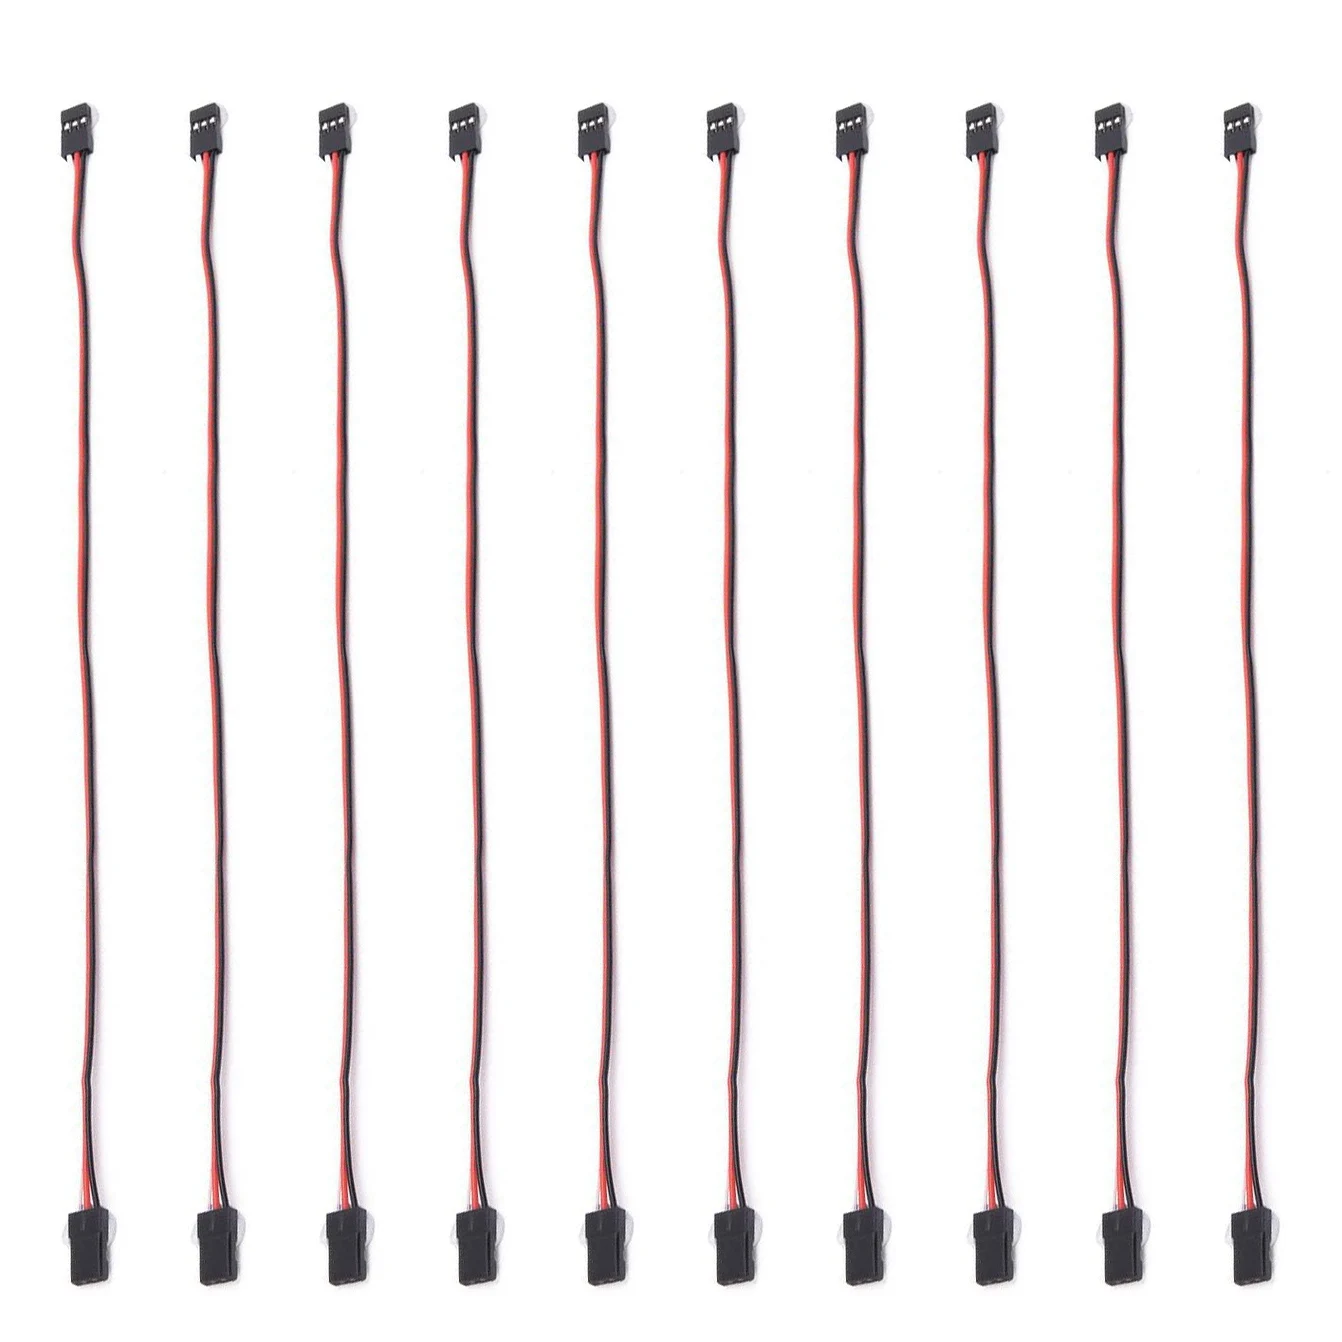 

10 Pieces of 300MM Suitable for RC JR FUTABA Male-To-Male Servo Extension Cable Anti-Jamming Flight Control Cable